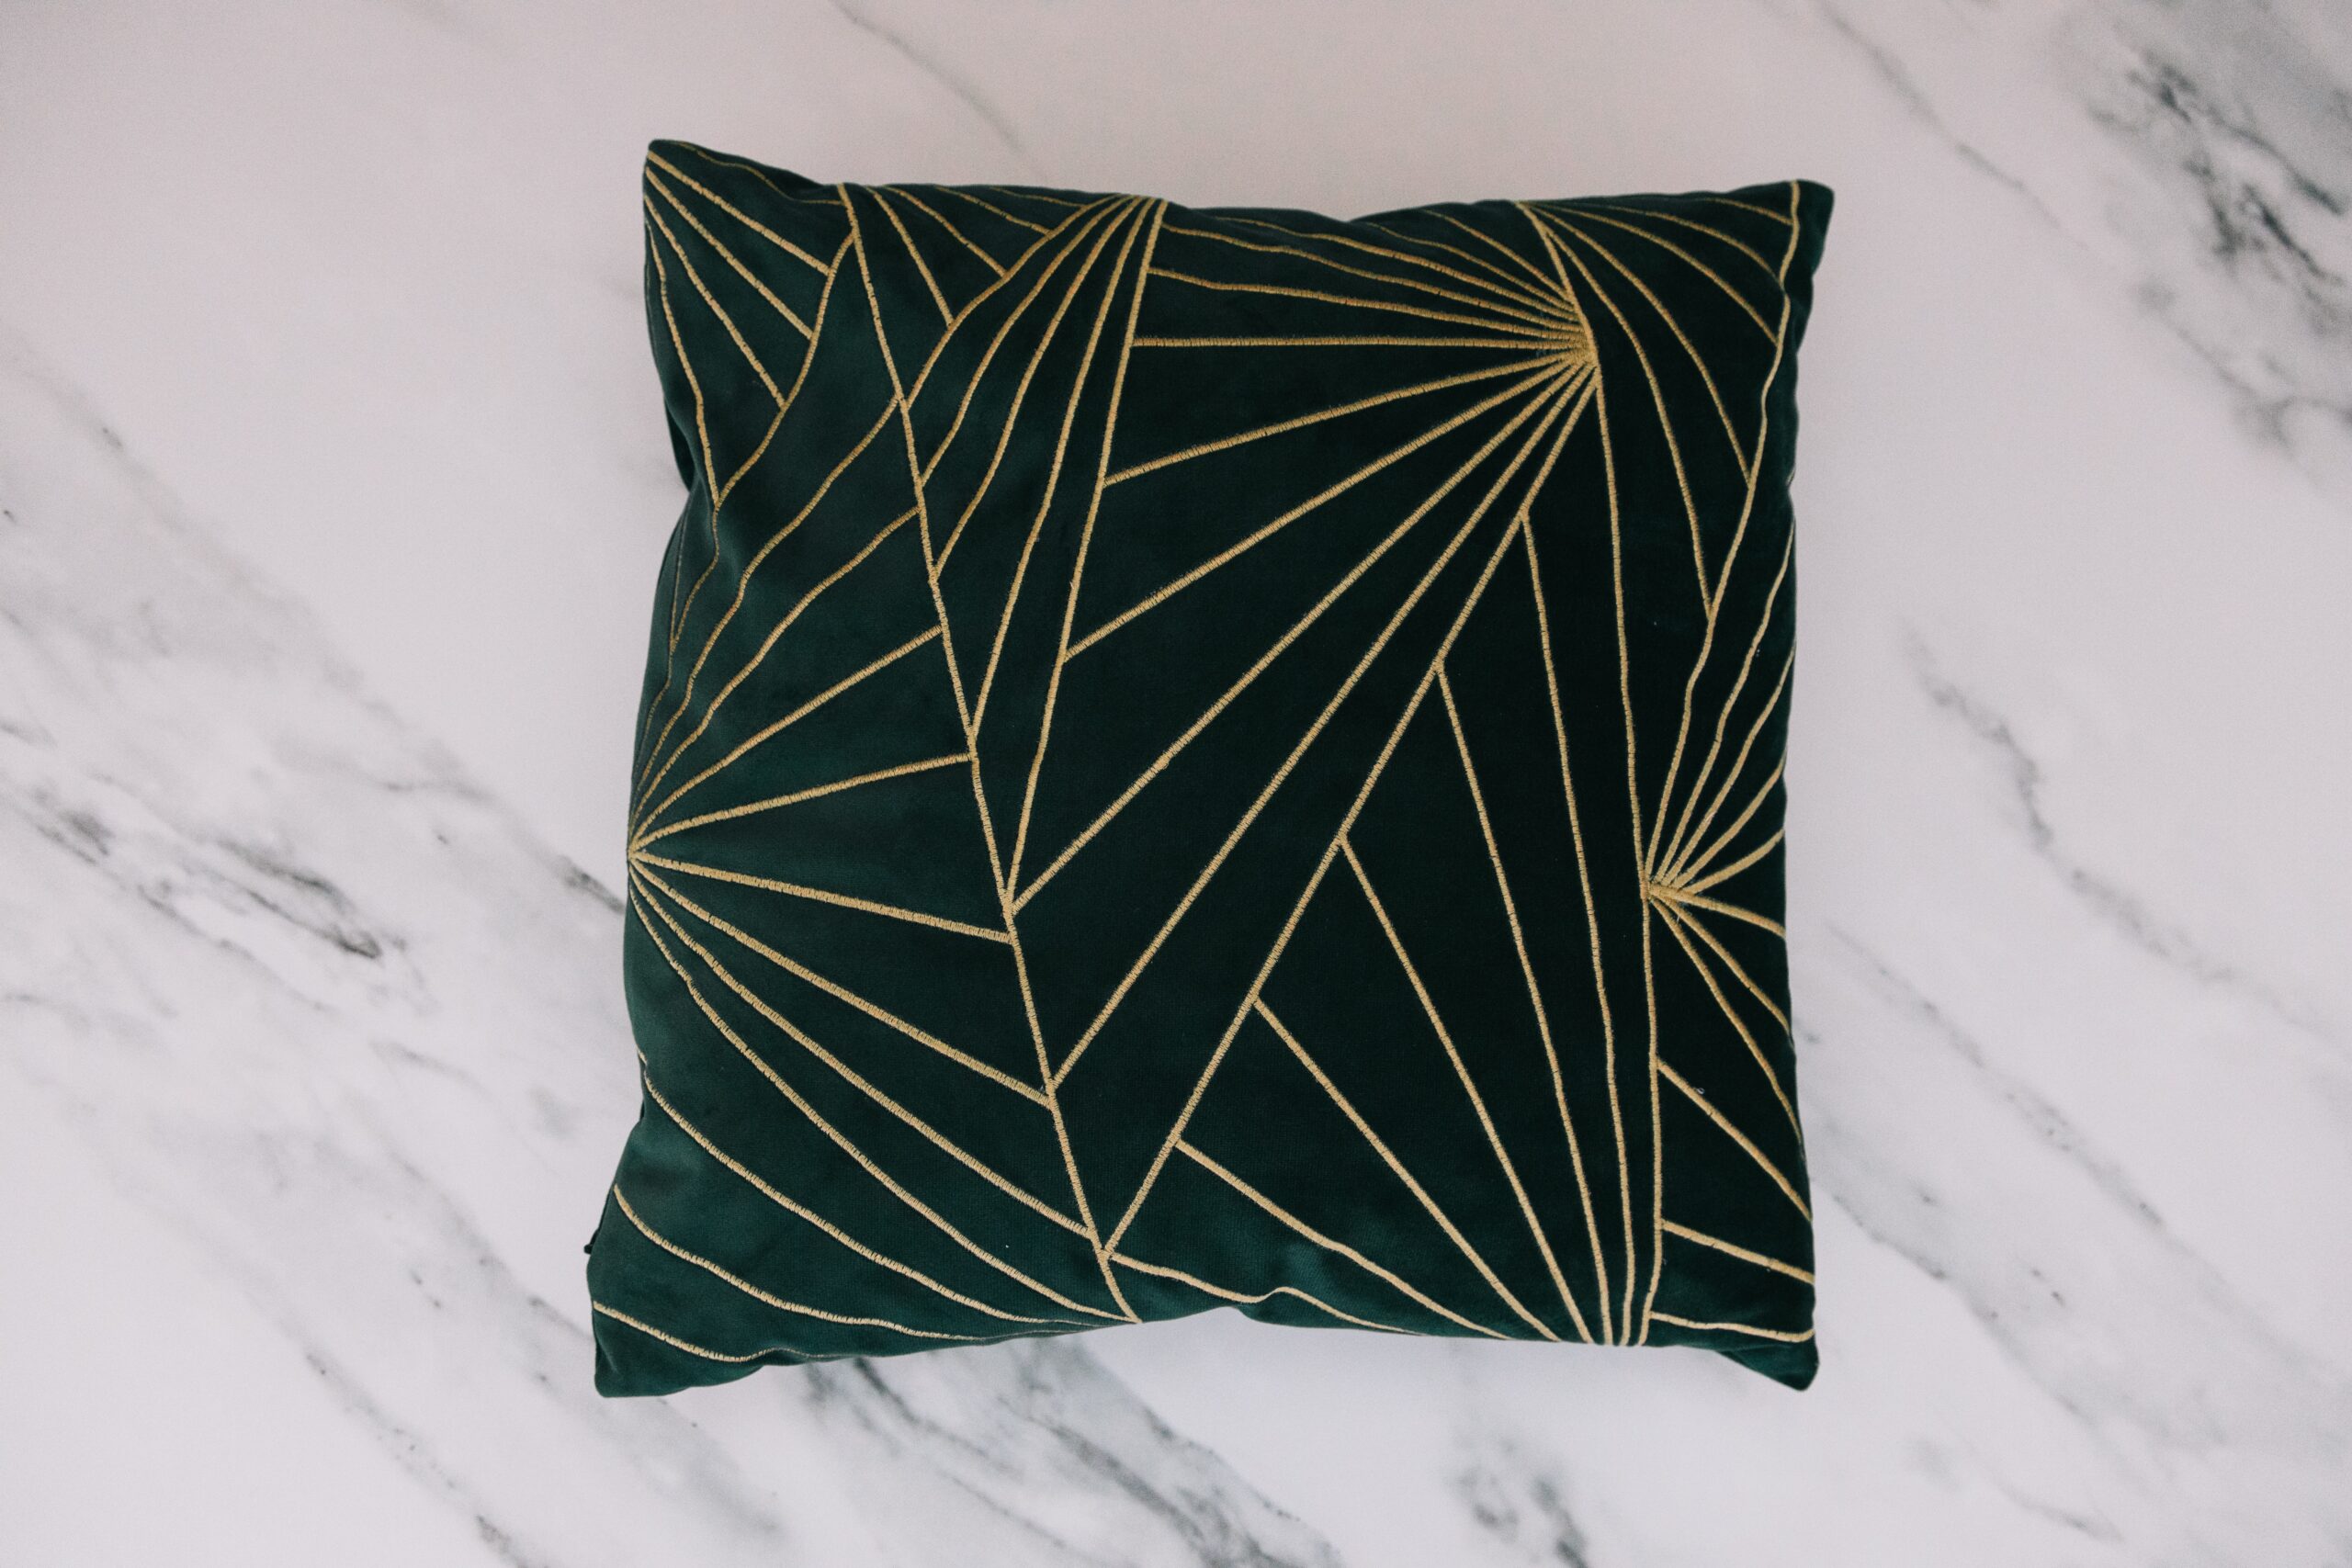 A throw pillow with geometric shapes